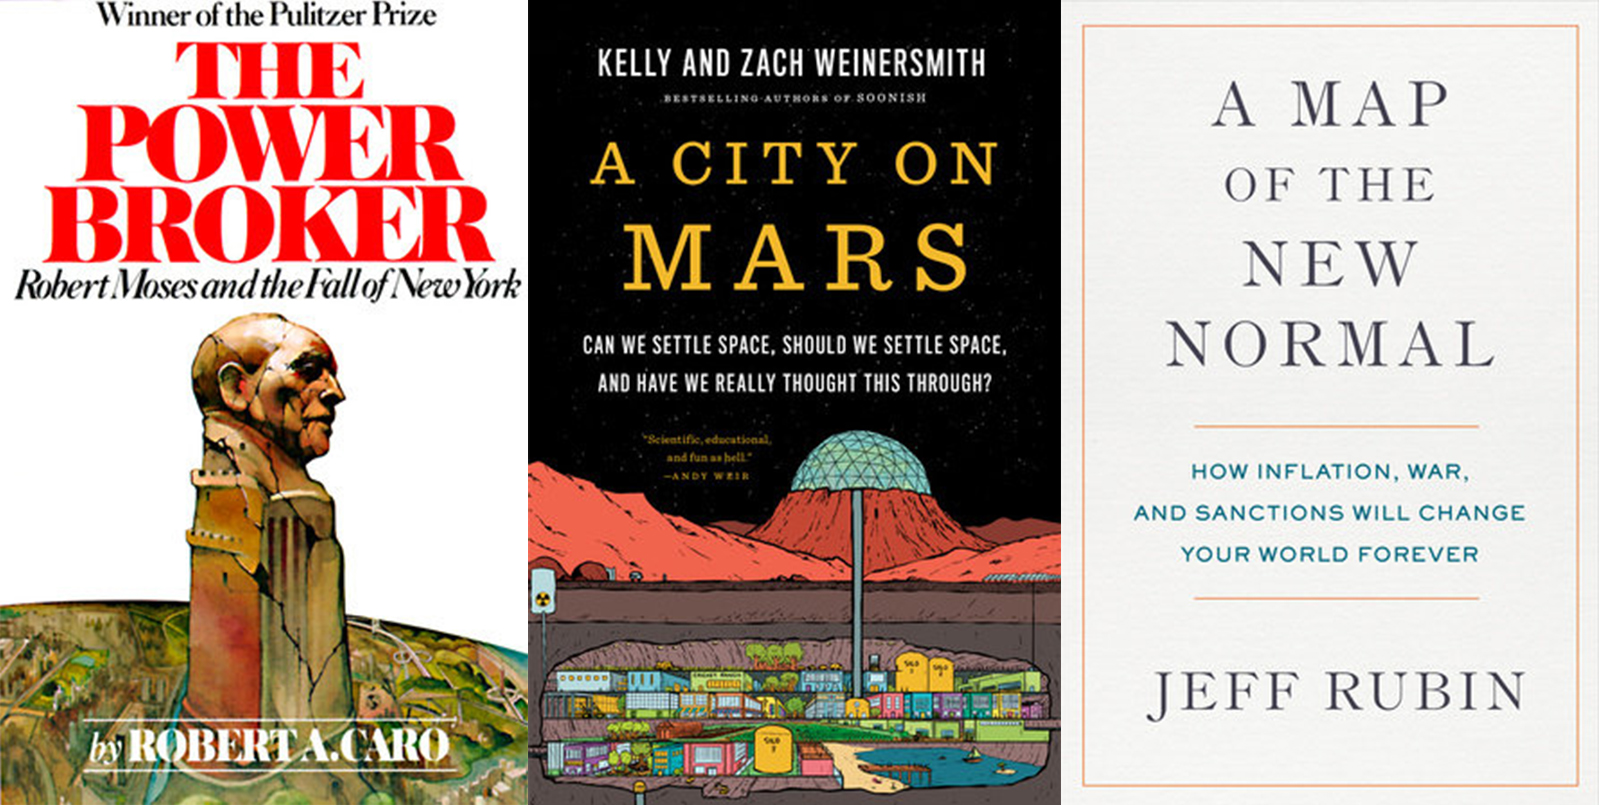 Three book covers, from left: 'The Power Broker' by Robert A. Caro; 'A City on Mars' by Kelly and Zach Weinersmith; 'A Map of the New Normal' by Jeff Rubin.